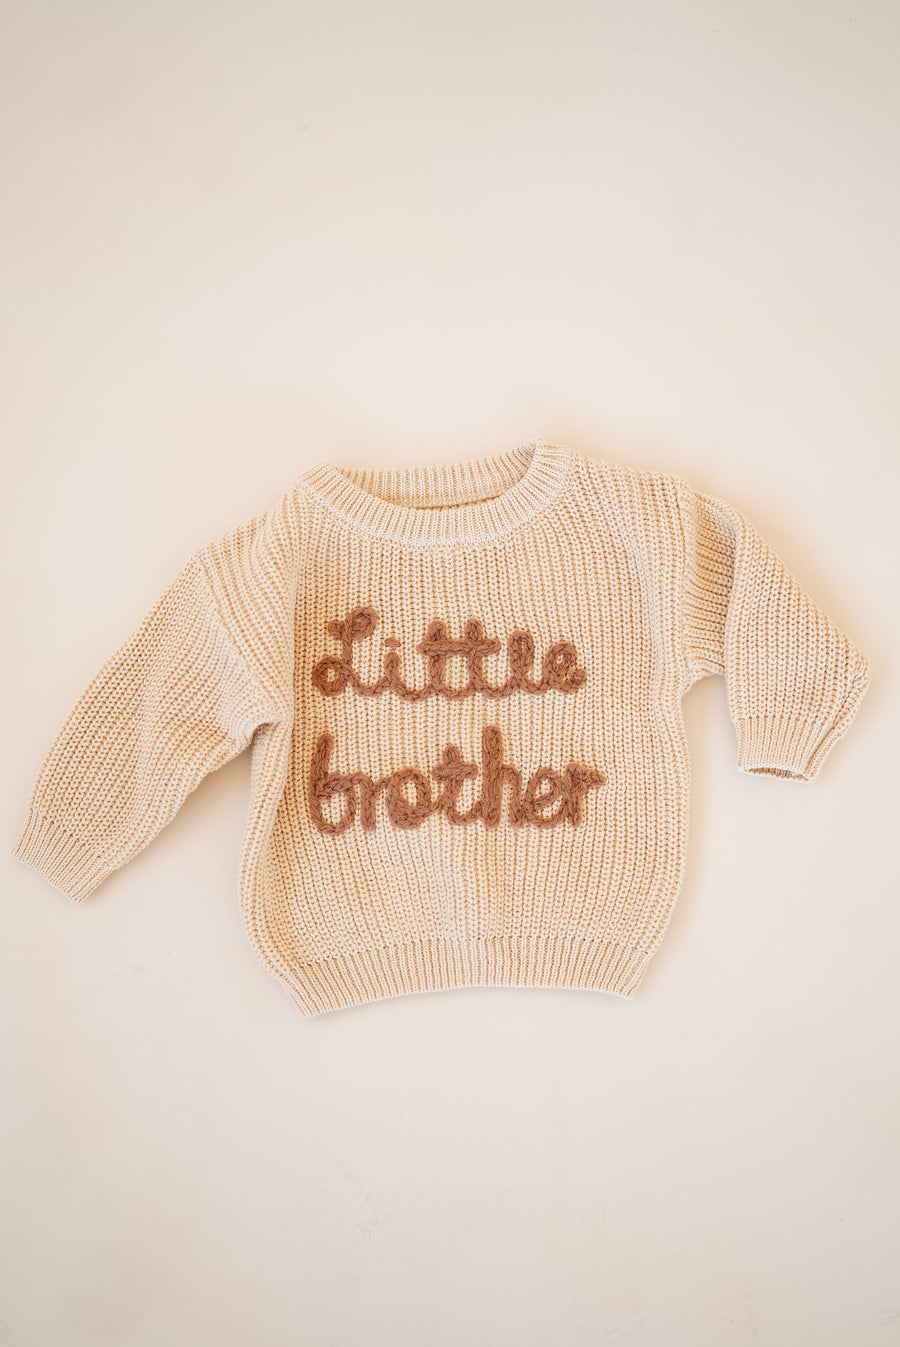 Little Brother Knit Sweater